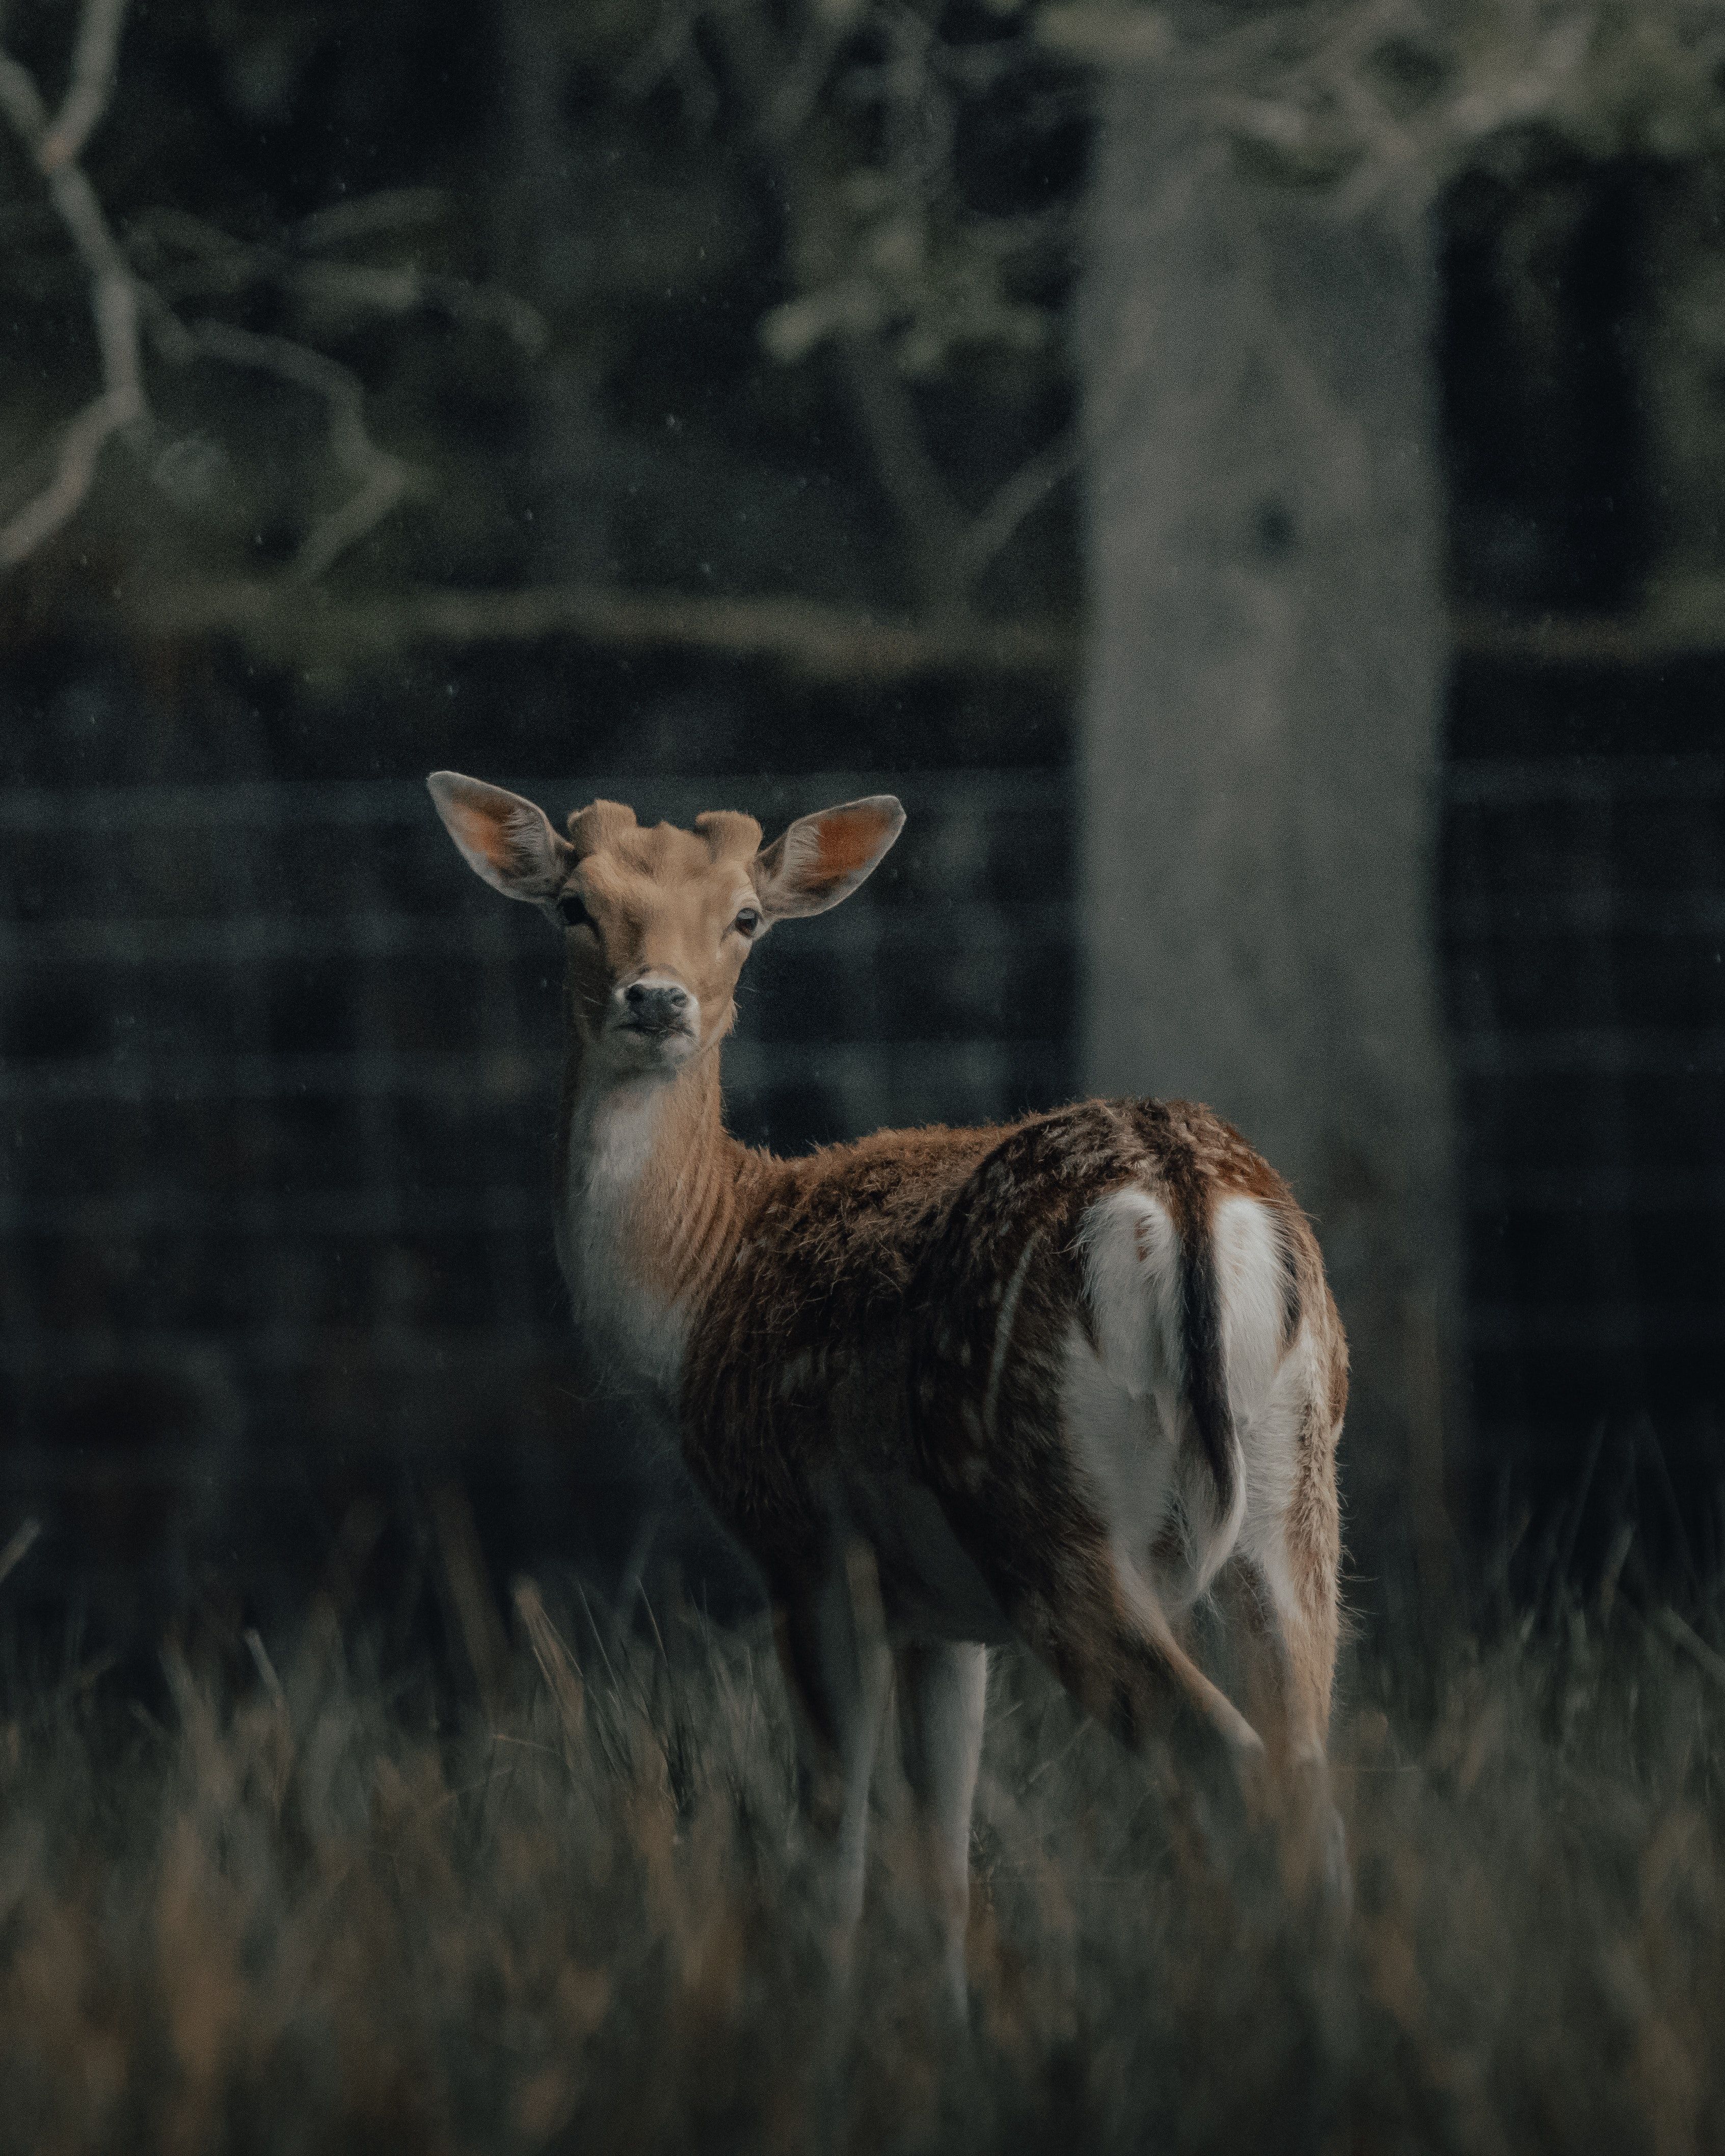 A deer standing in a grassy area with trees in the background. - Deer